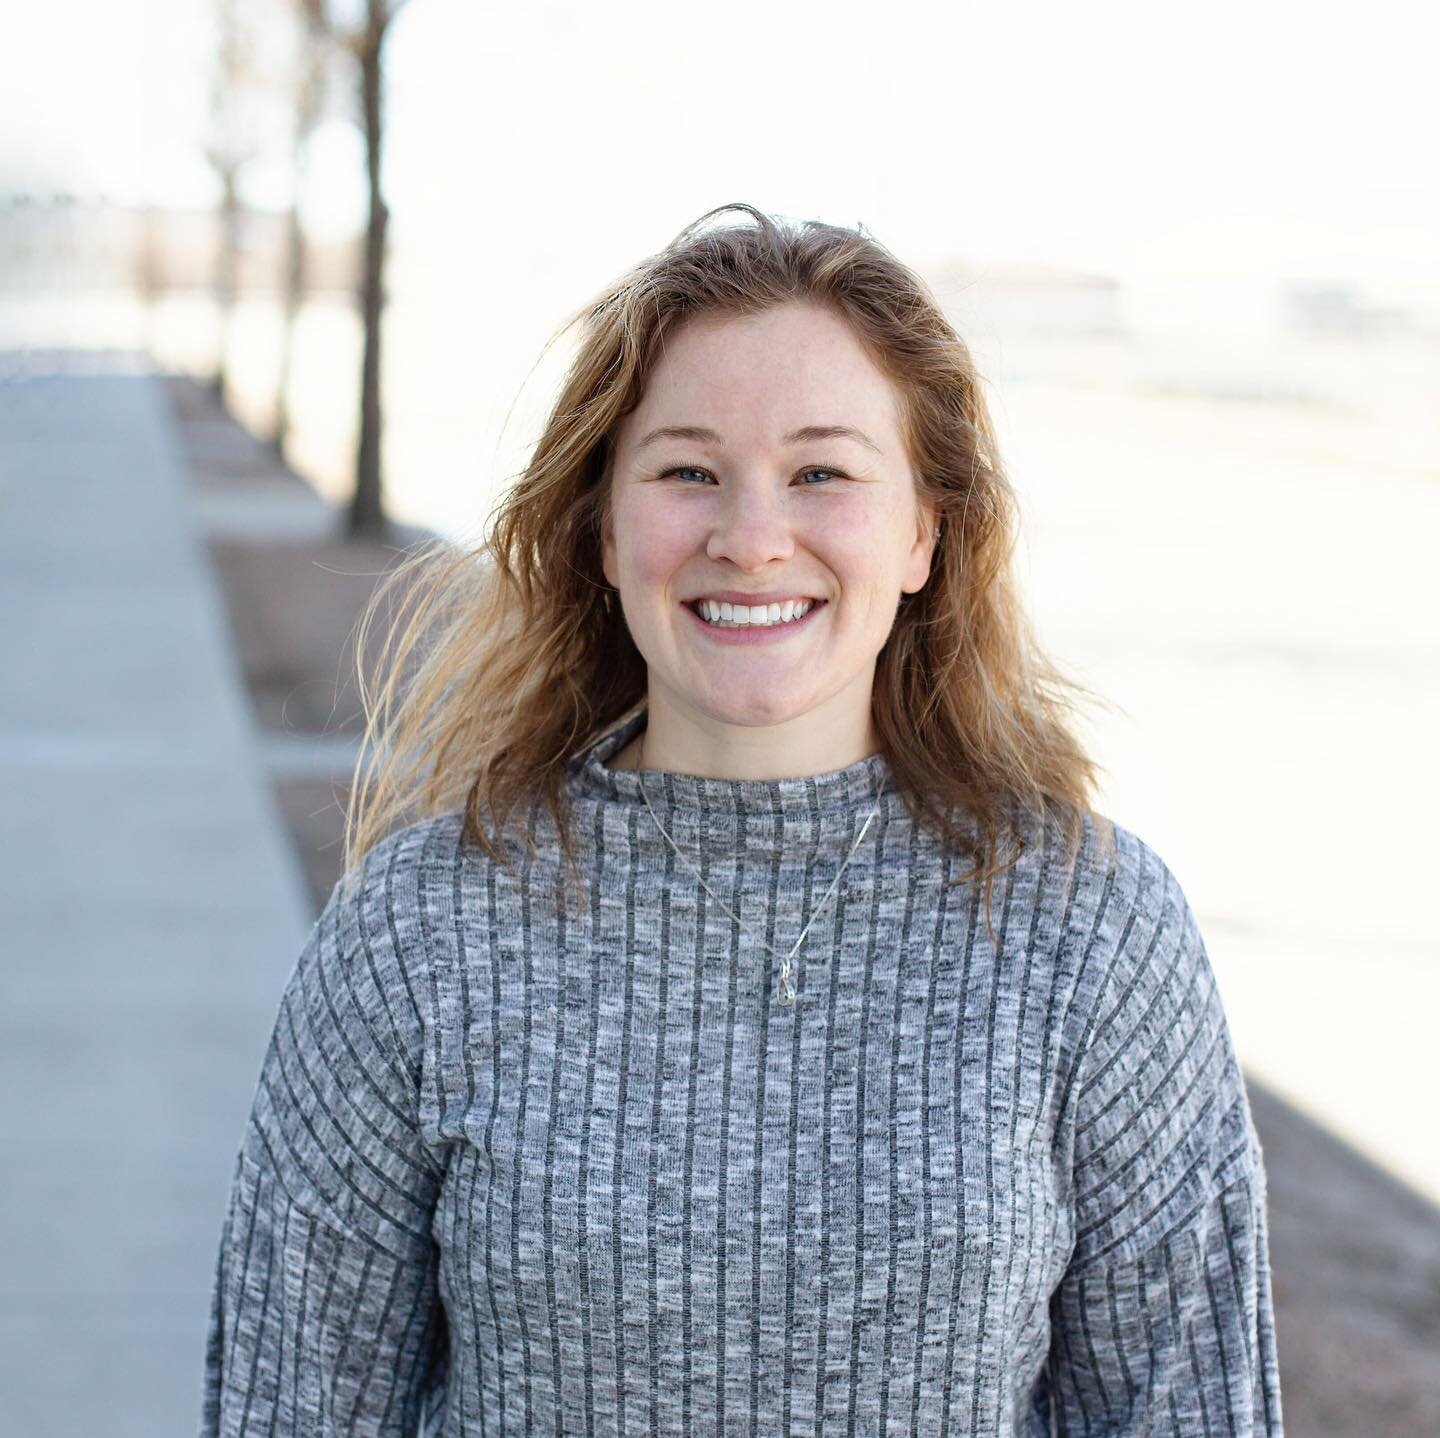 Please welcome Allie to the Make West team, our Rockstar Design Maker!⁠
⁠
Allie&rsquo;s passion for connecting the creative and tangible world and dissecting our mind/body connection makes her an incredible match for experiential graphics. Her abilit